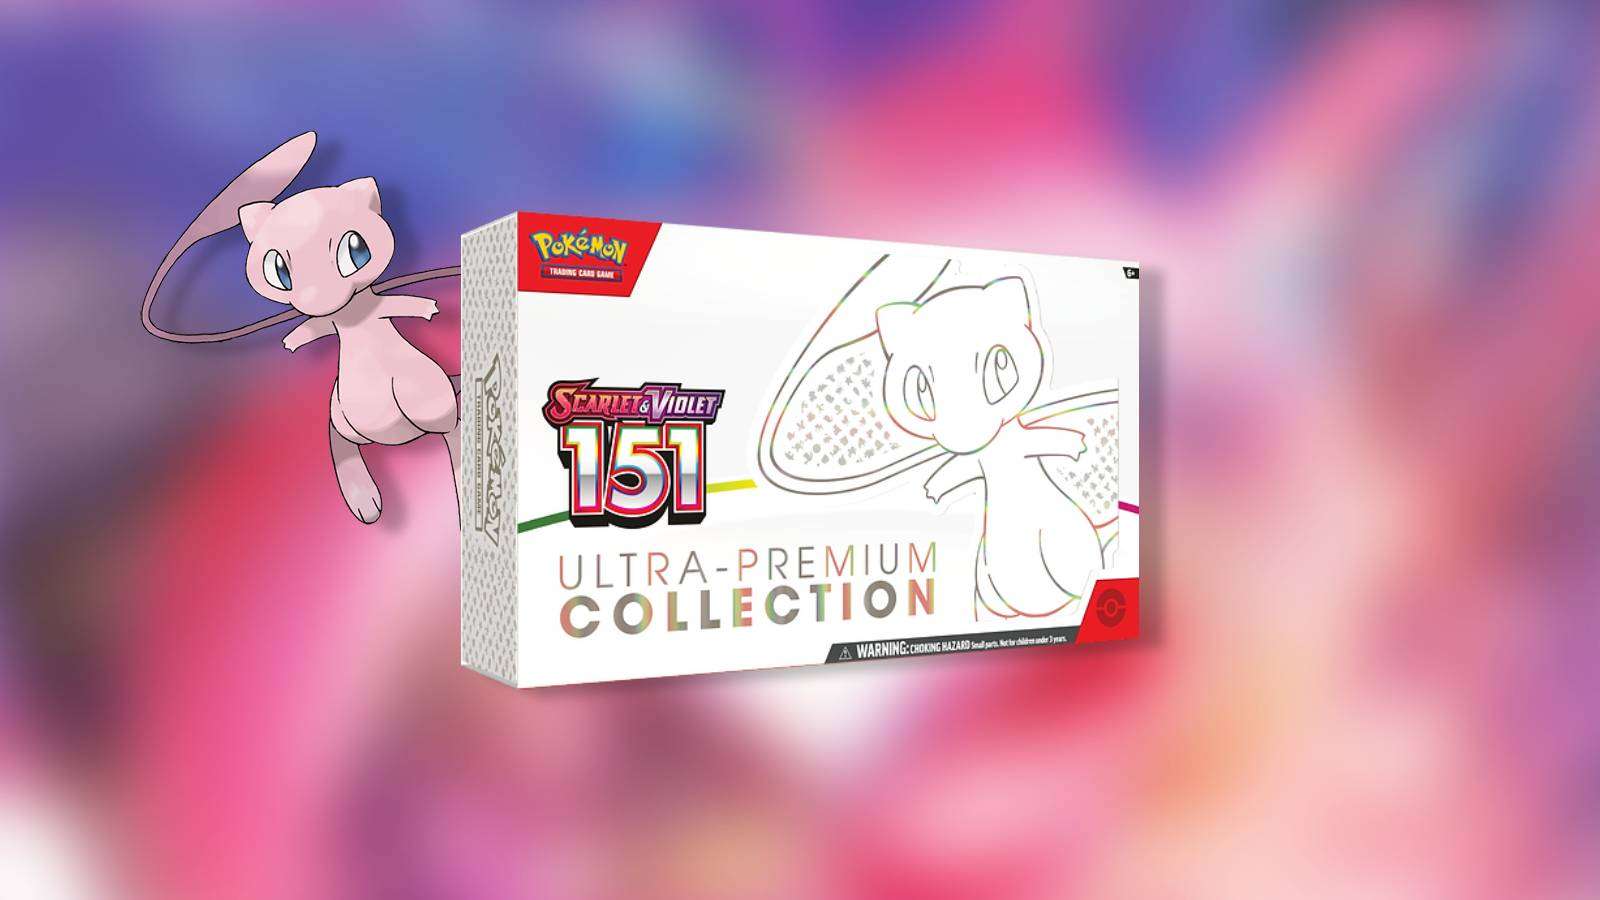 The Pokemon 151 Ultra Premium Collection is shown against a blurred background